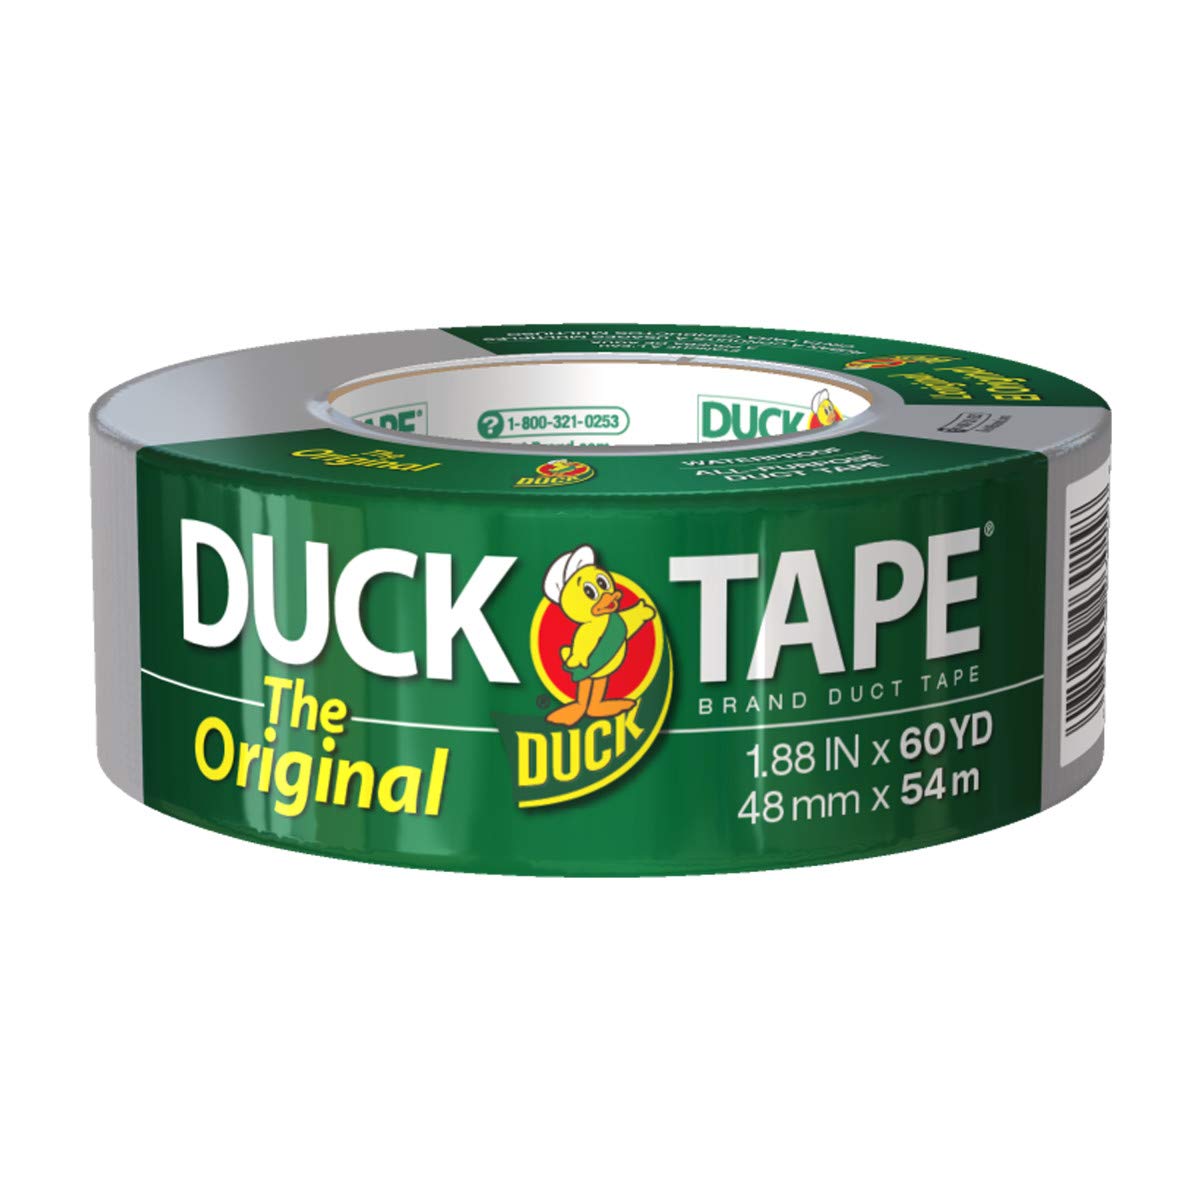 The Original Duck Brand 394475 Duct Tape 1-Pack 1.88 Inch x 60 Yard Silver